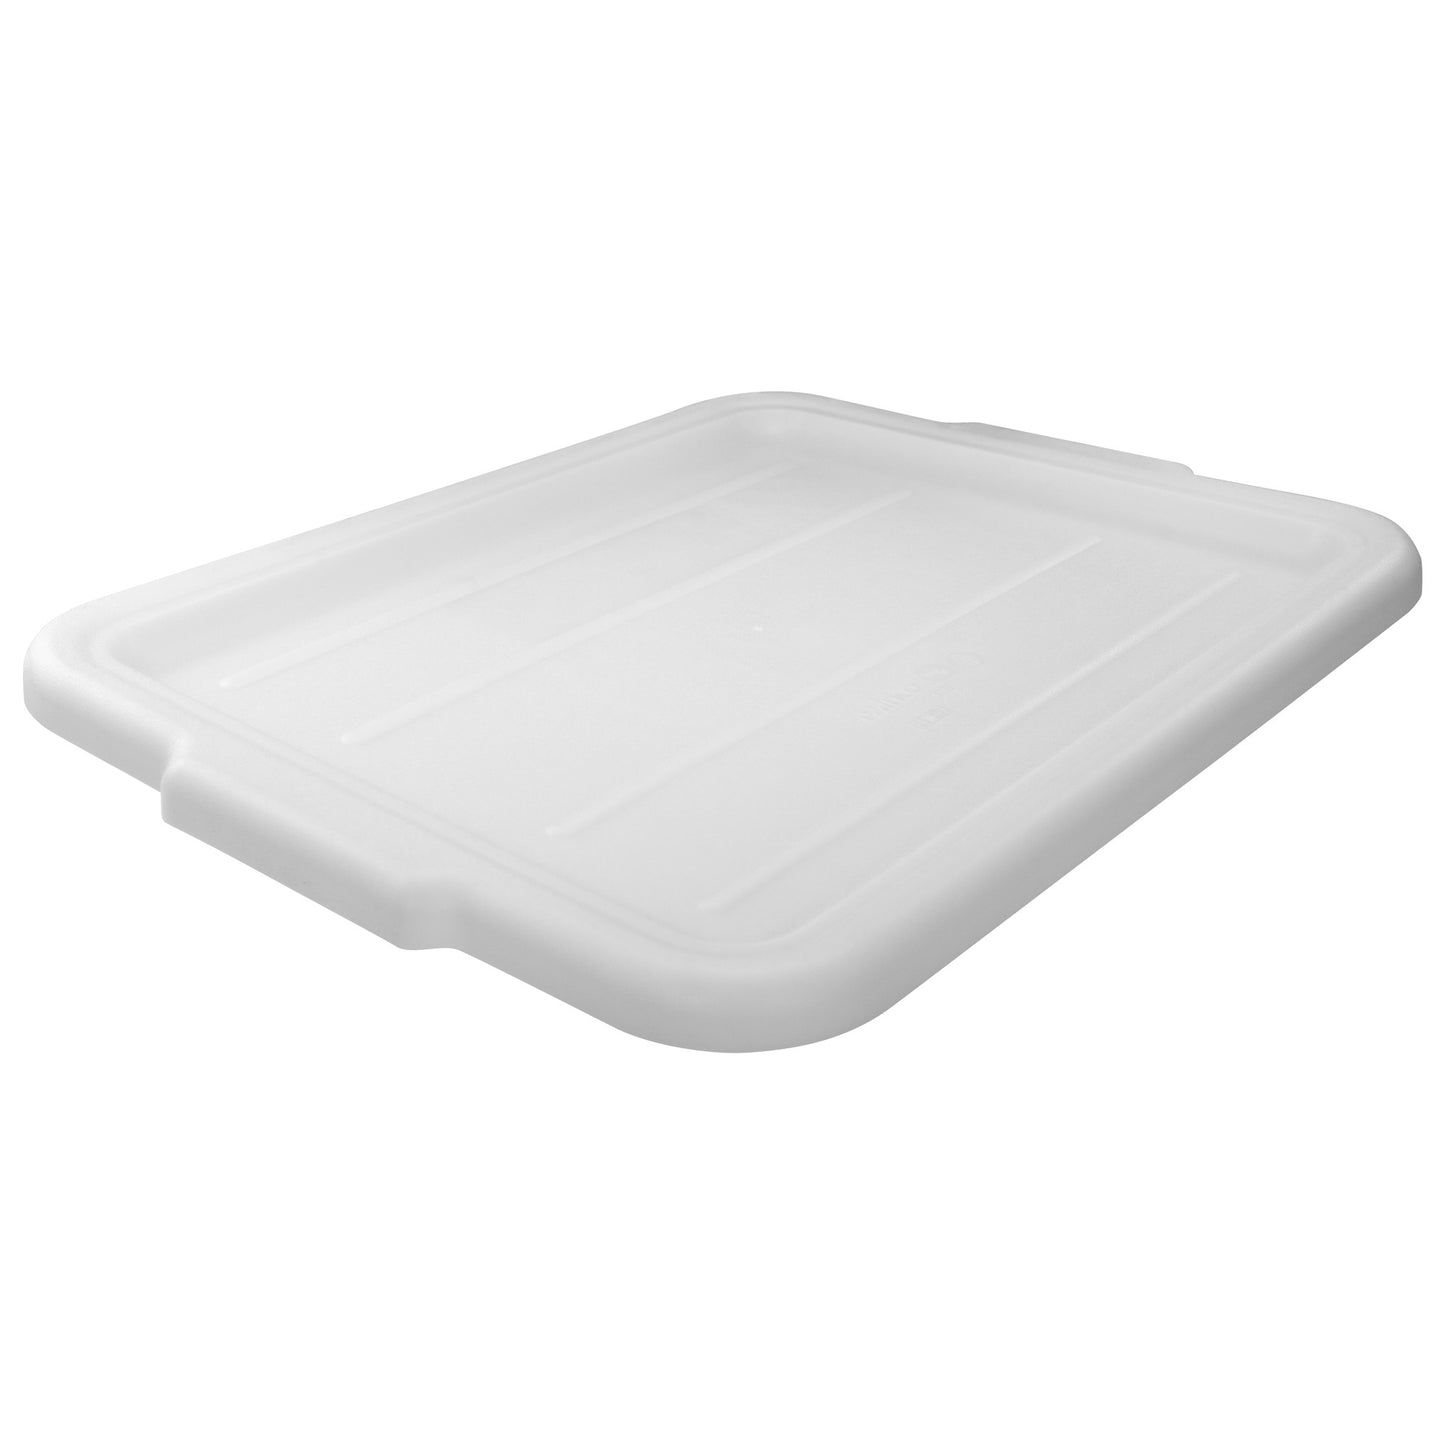 PLW-CW - Cover for PLW-7 Series Dish Boxes - White